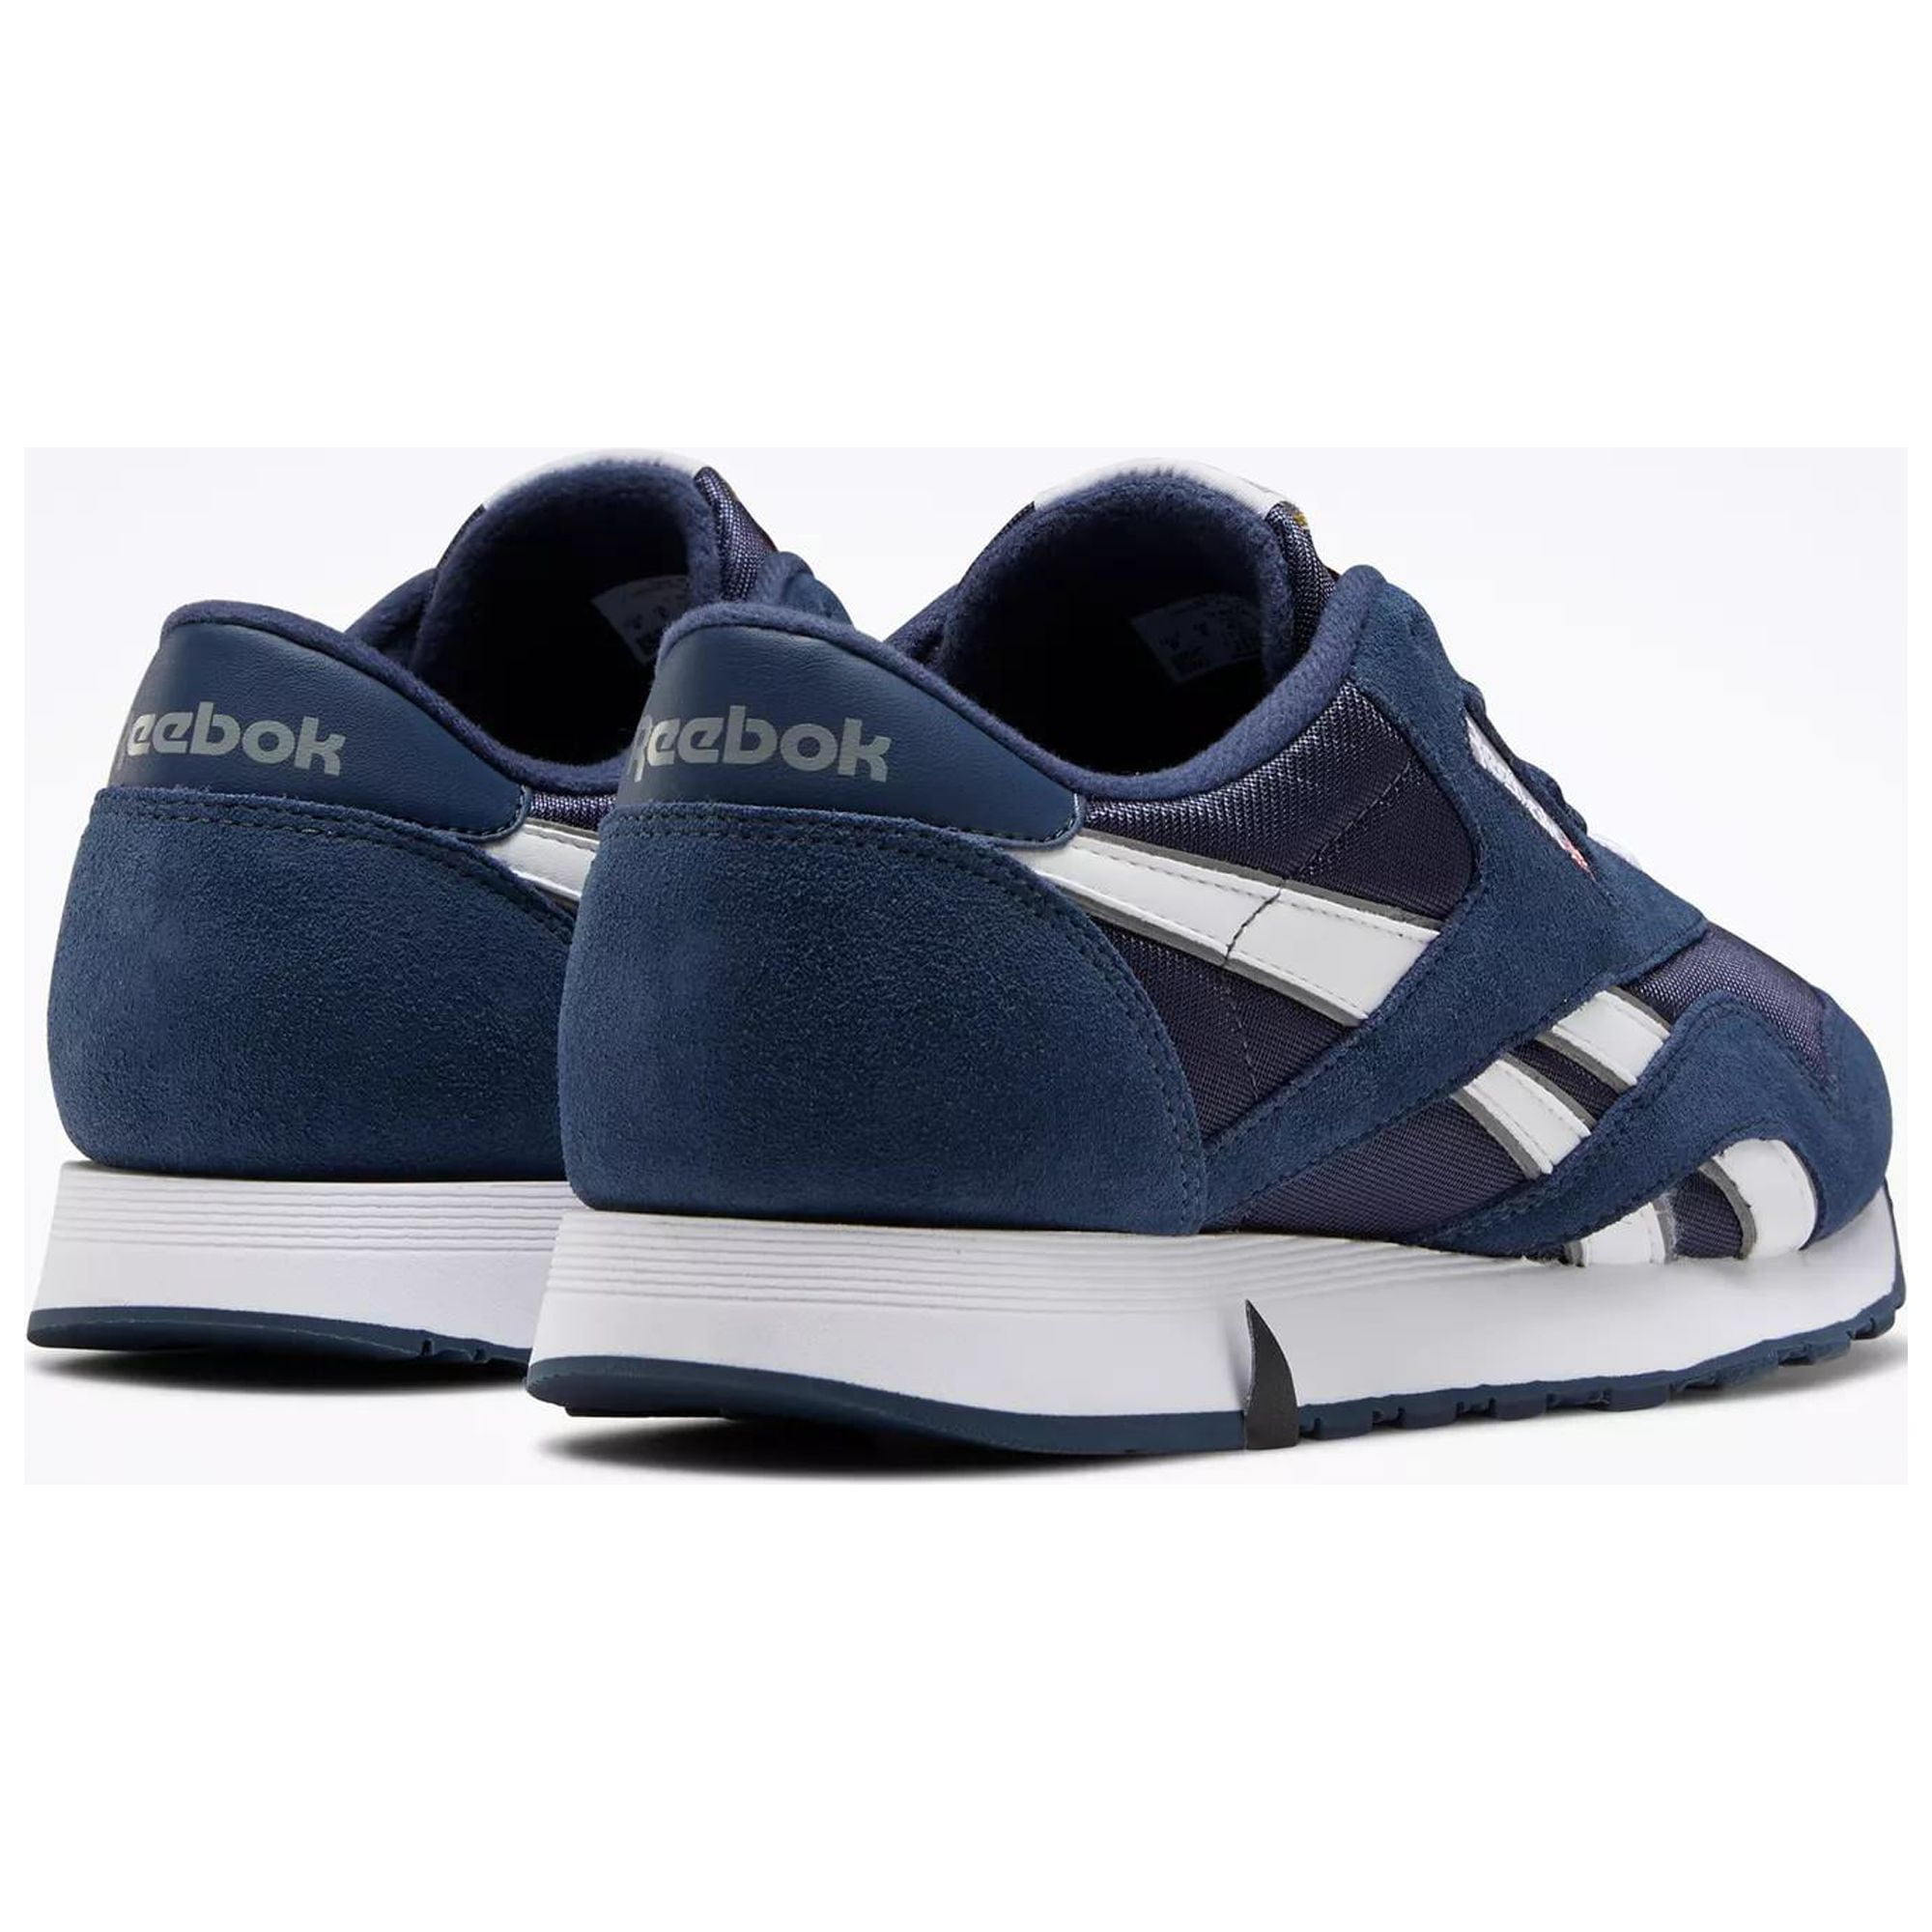 Buy Reebok Classics Men's Classic Electro Navy Blue, Black and White  Sneakers - 8 UK/India (42 EU) (9 US) at Amazon.in